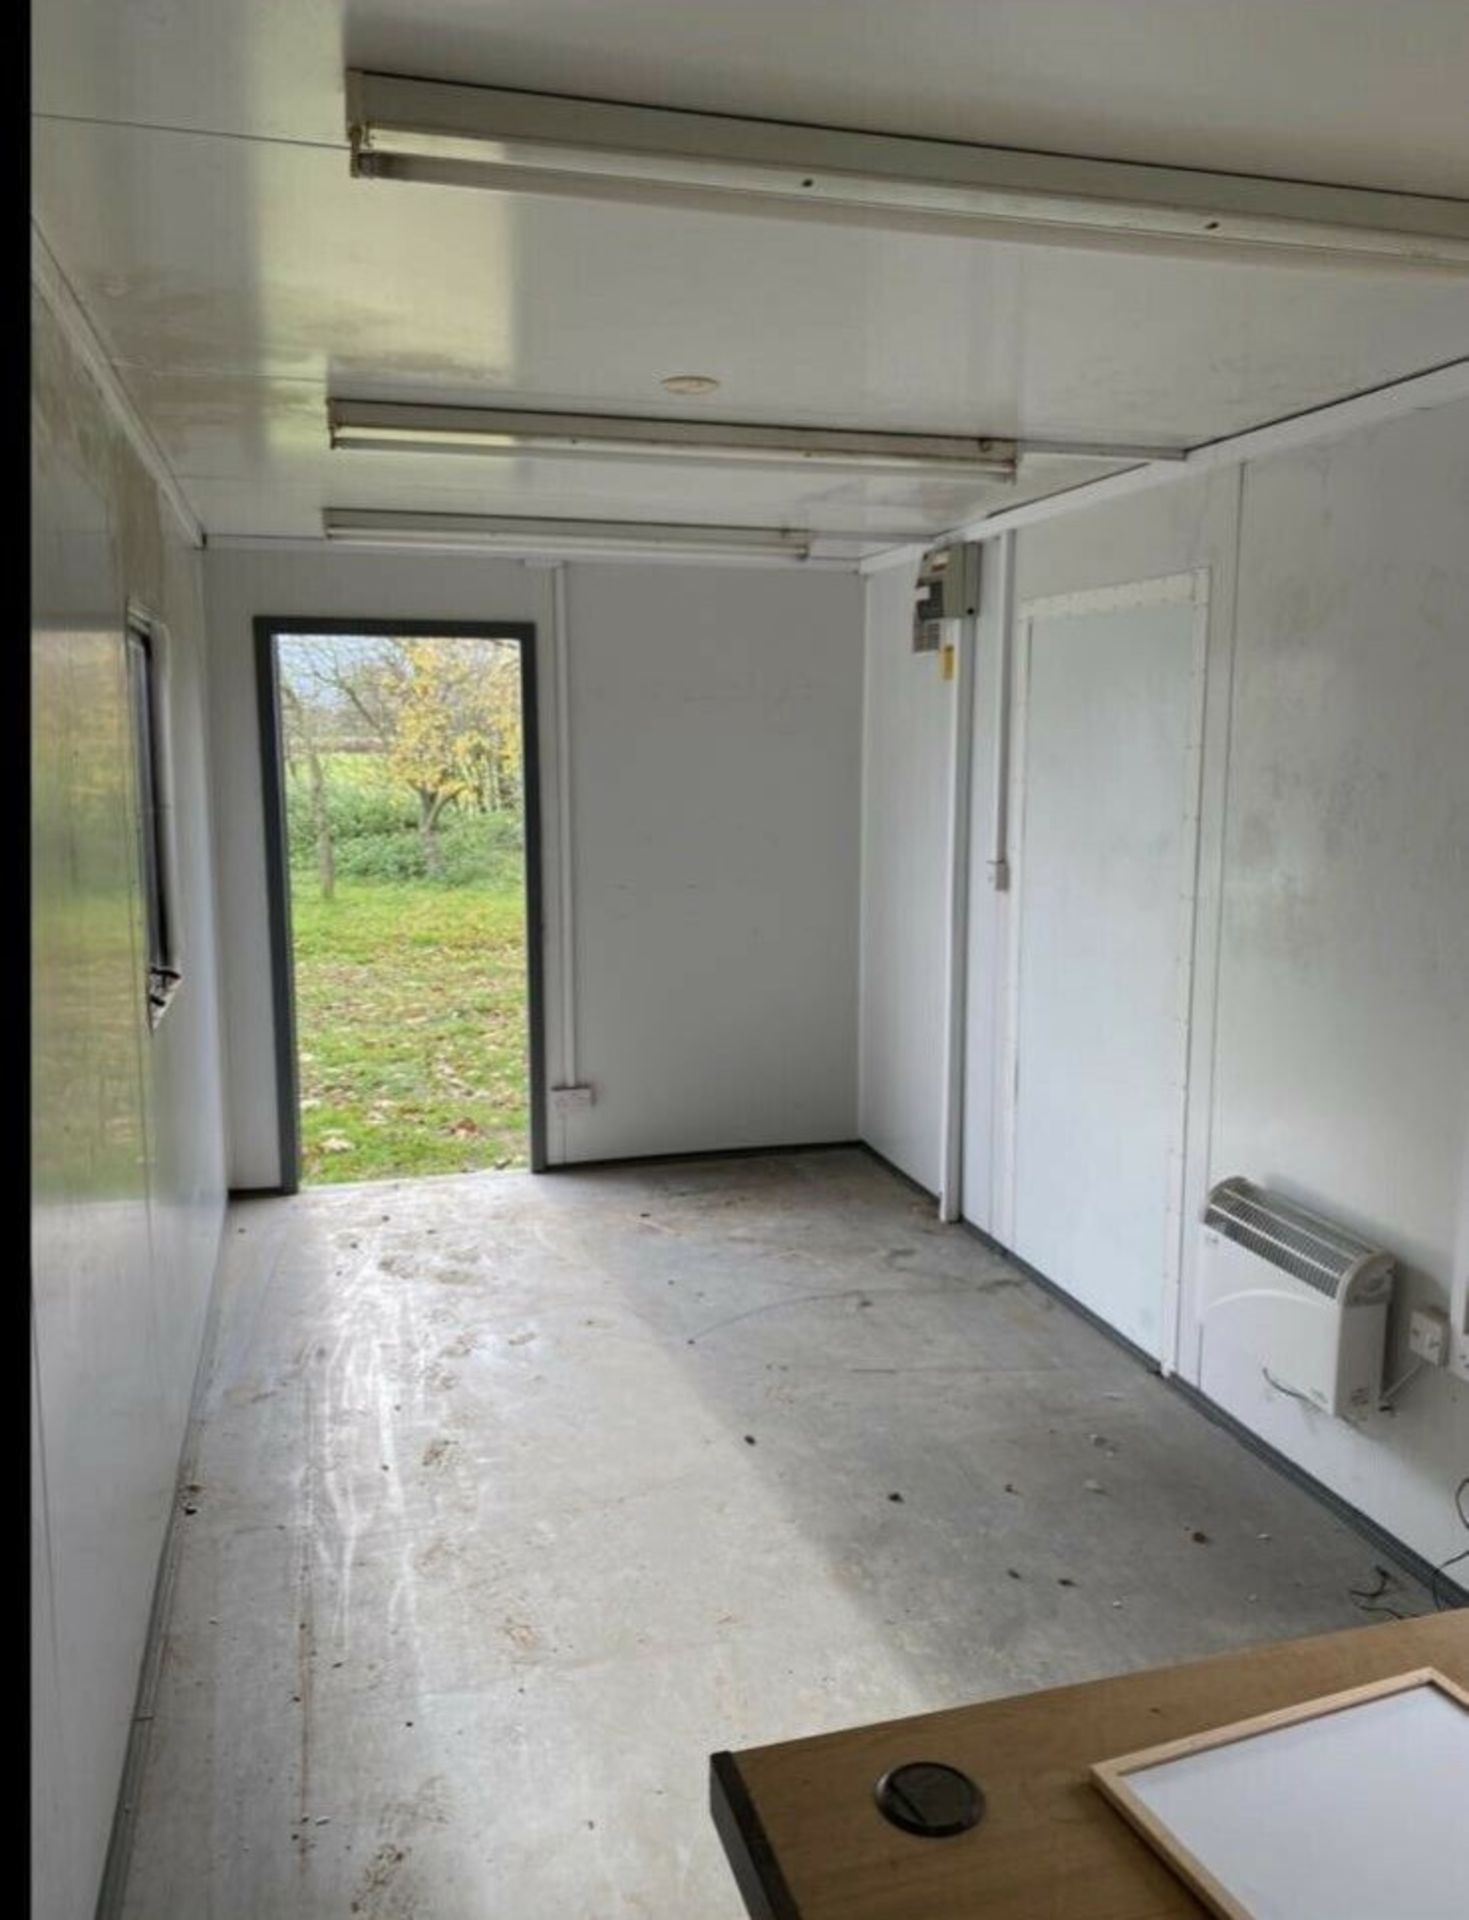 20ft Site Office, Staffroom - Image 5 of 8